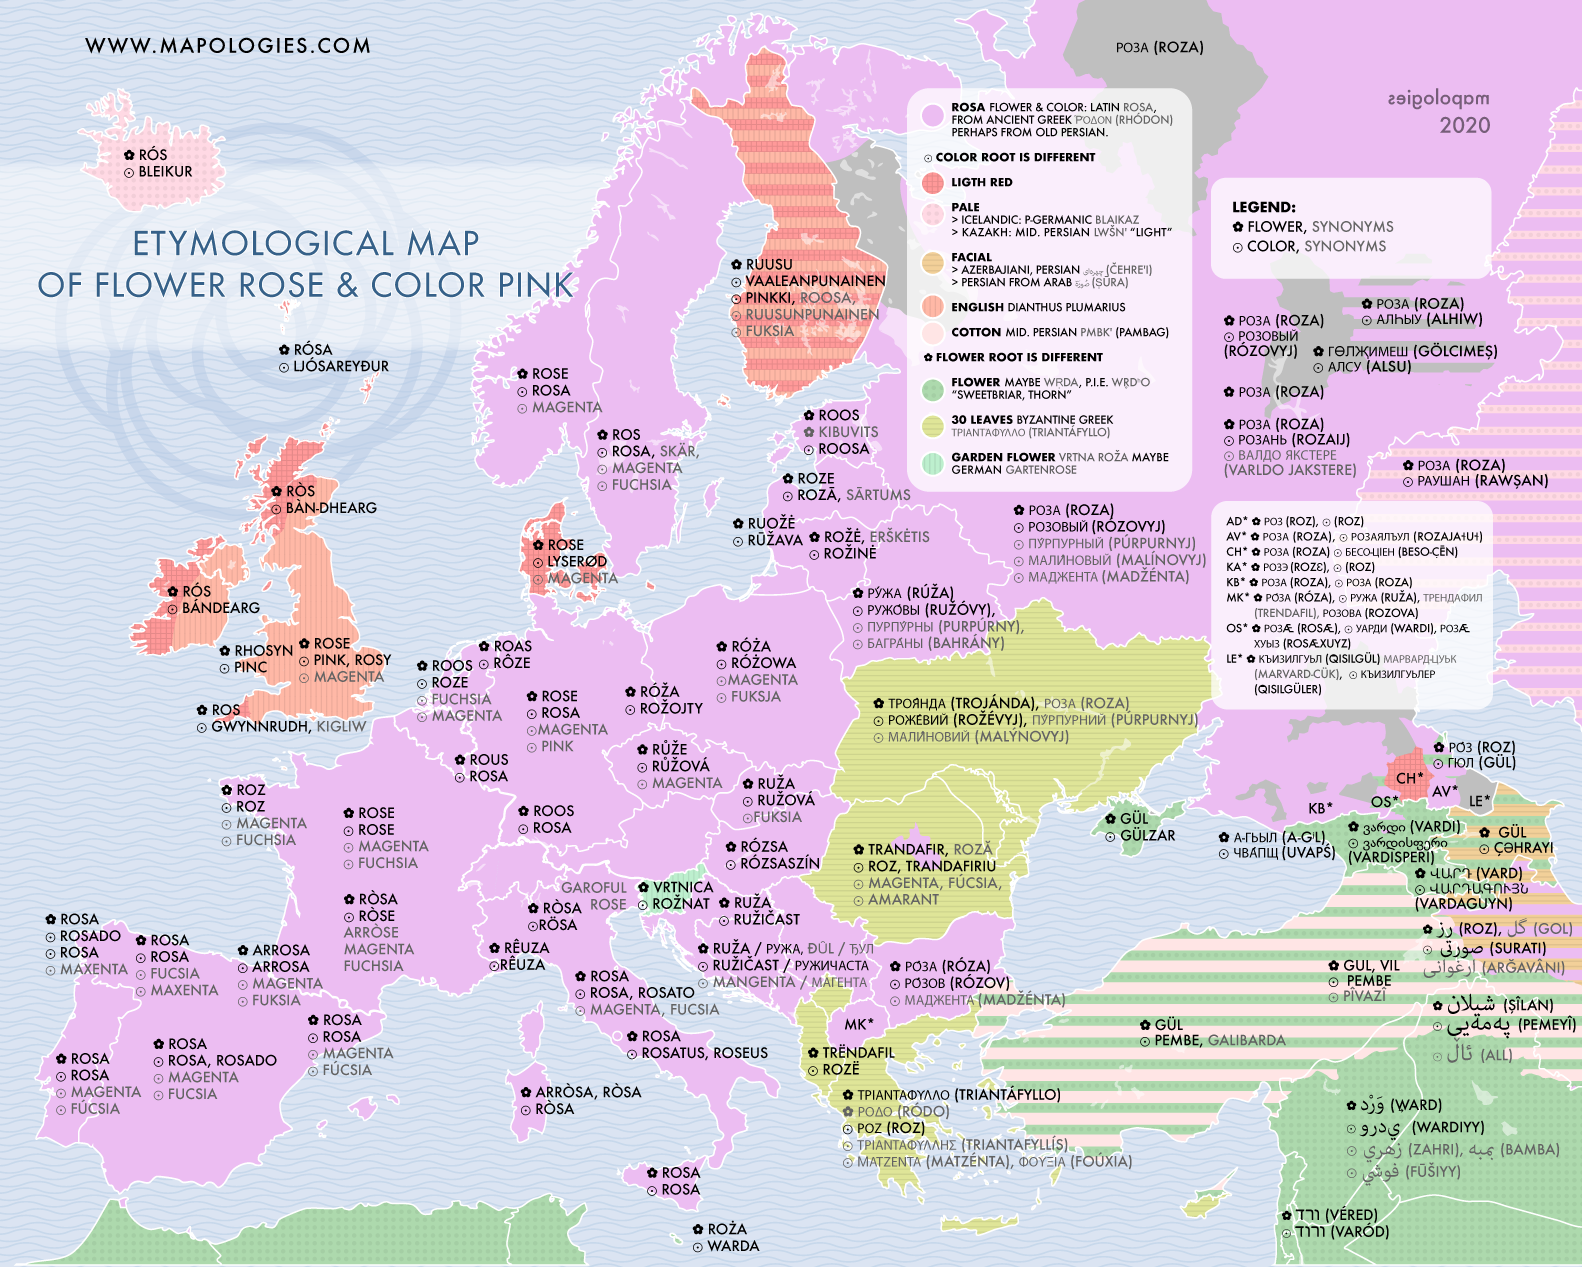 Etymological map of pink, the color, and rose, the flower, in several foreign languages